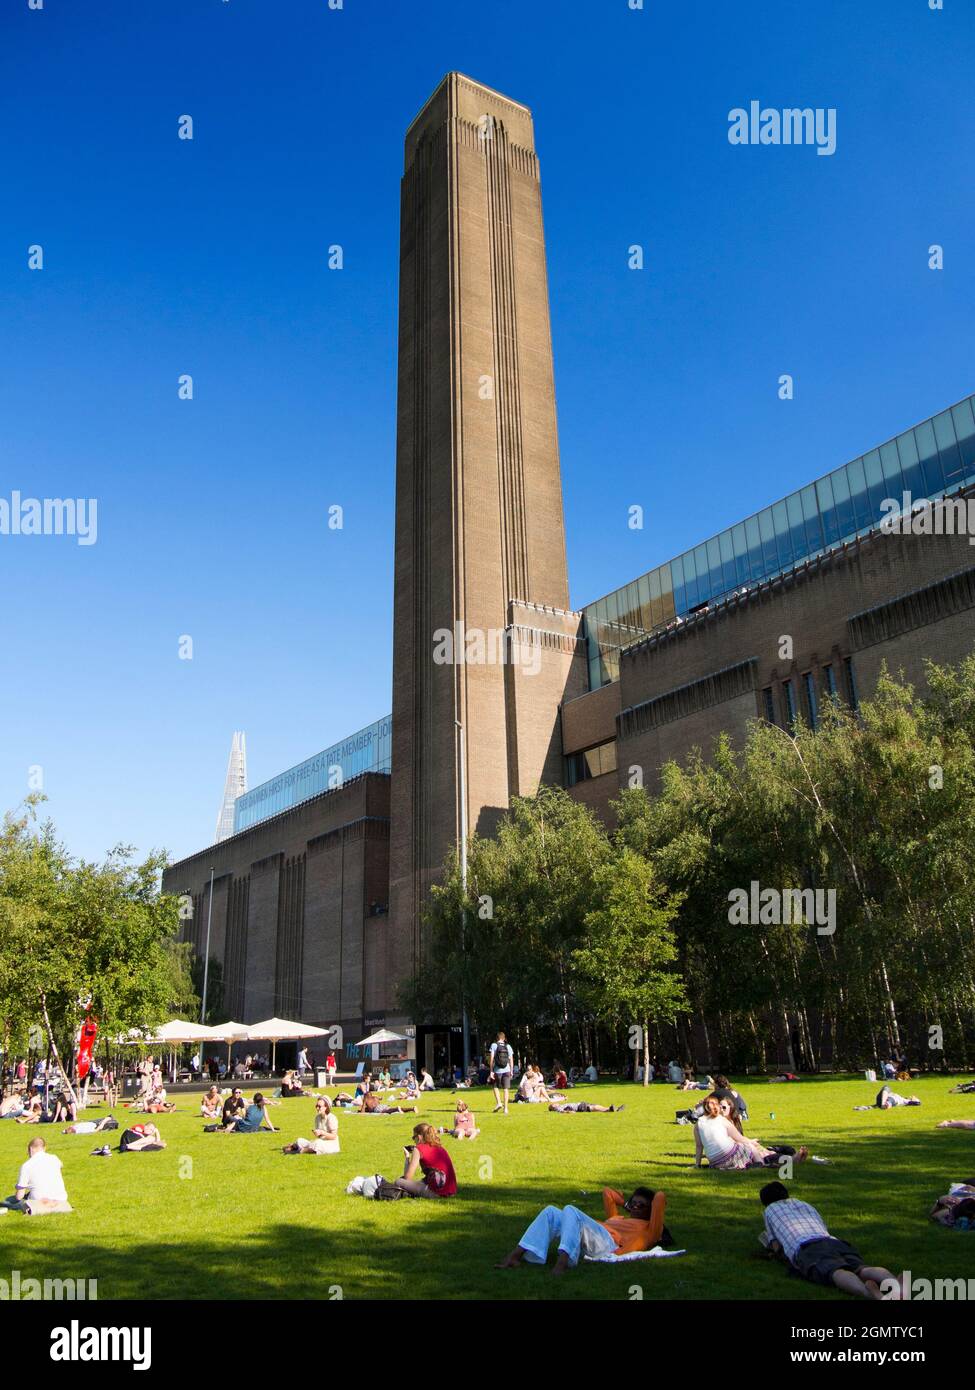 An idyllic summer day by the River Thames in London, England. We Brits don't get to see too much fine weather, so we know what to do when it does arri Stock Photo